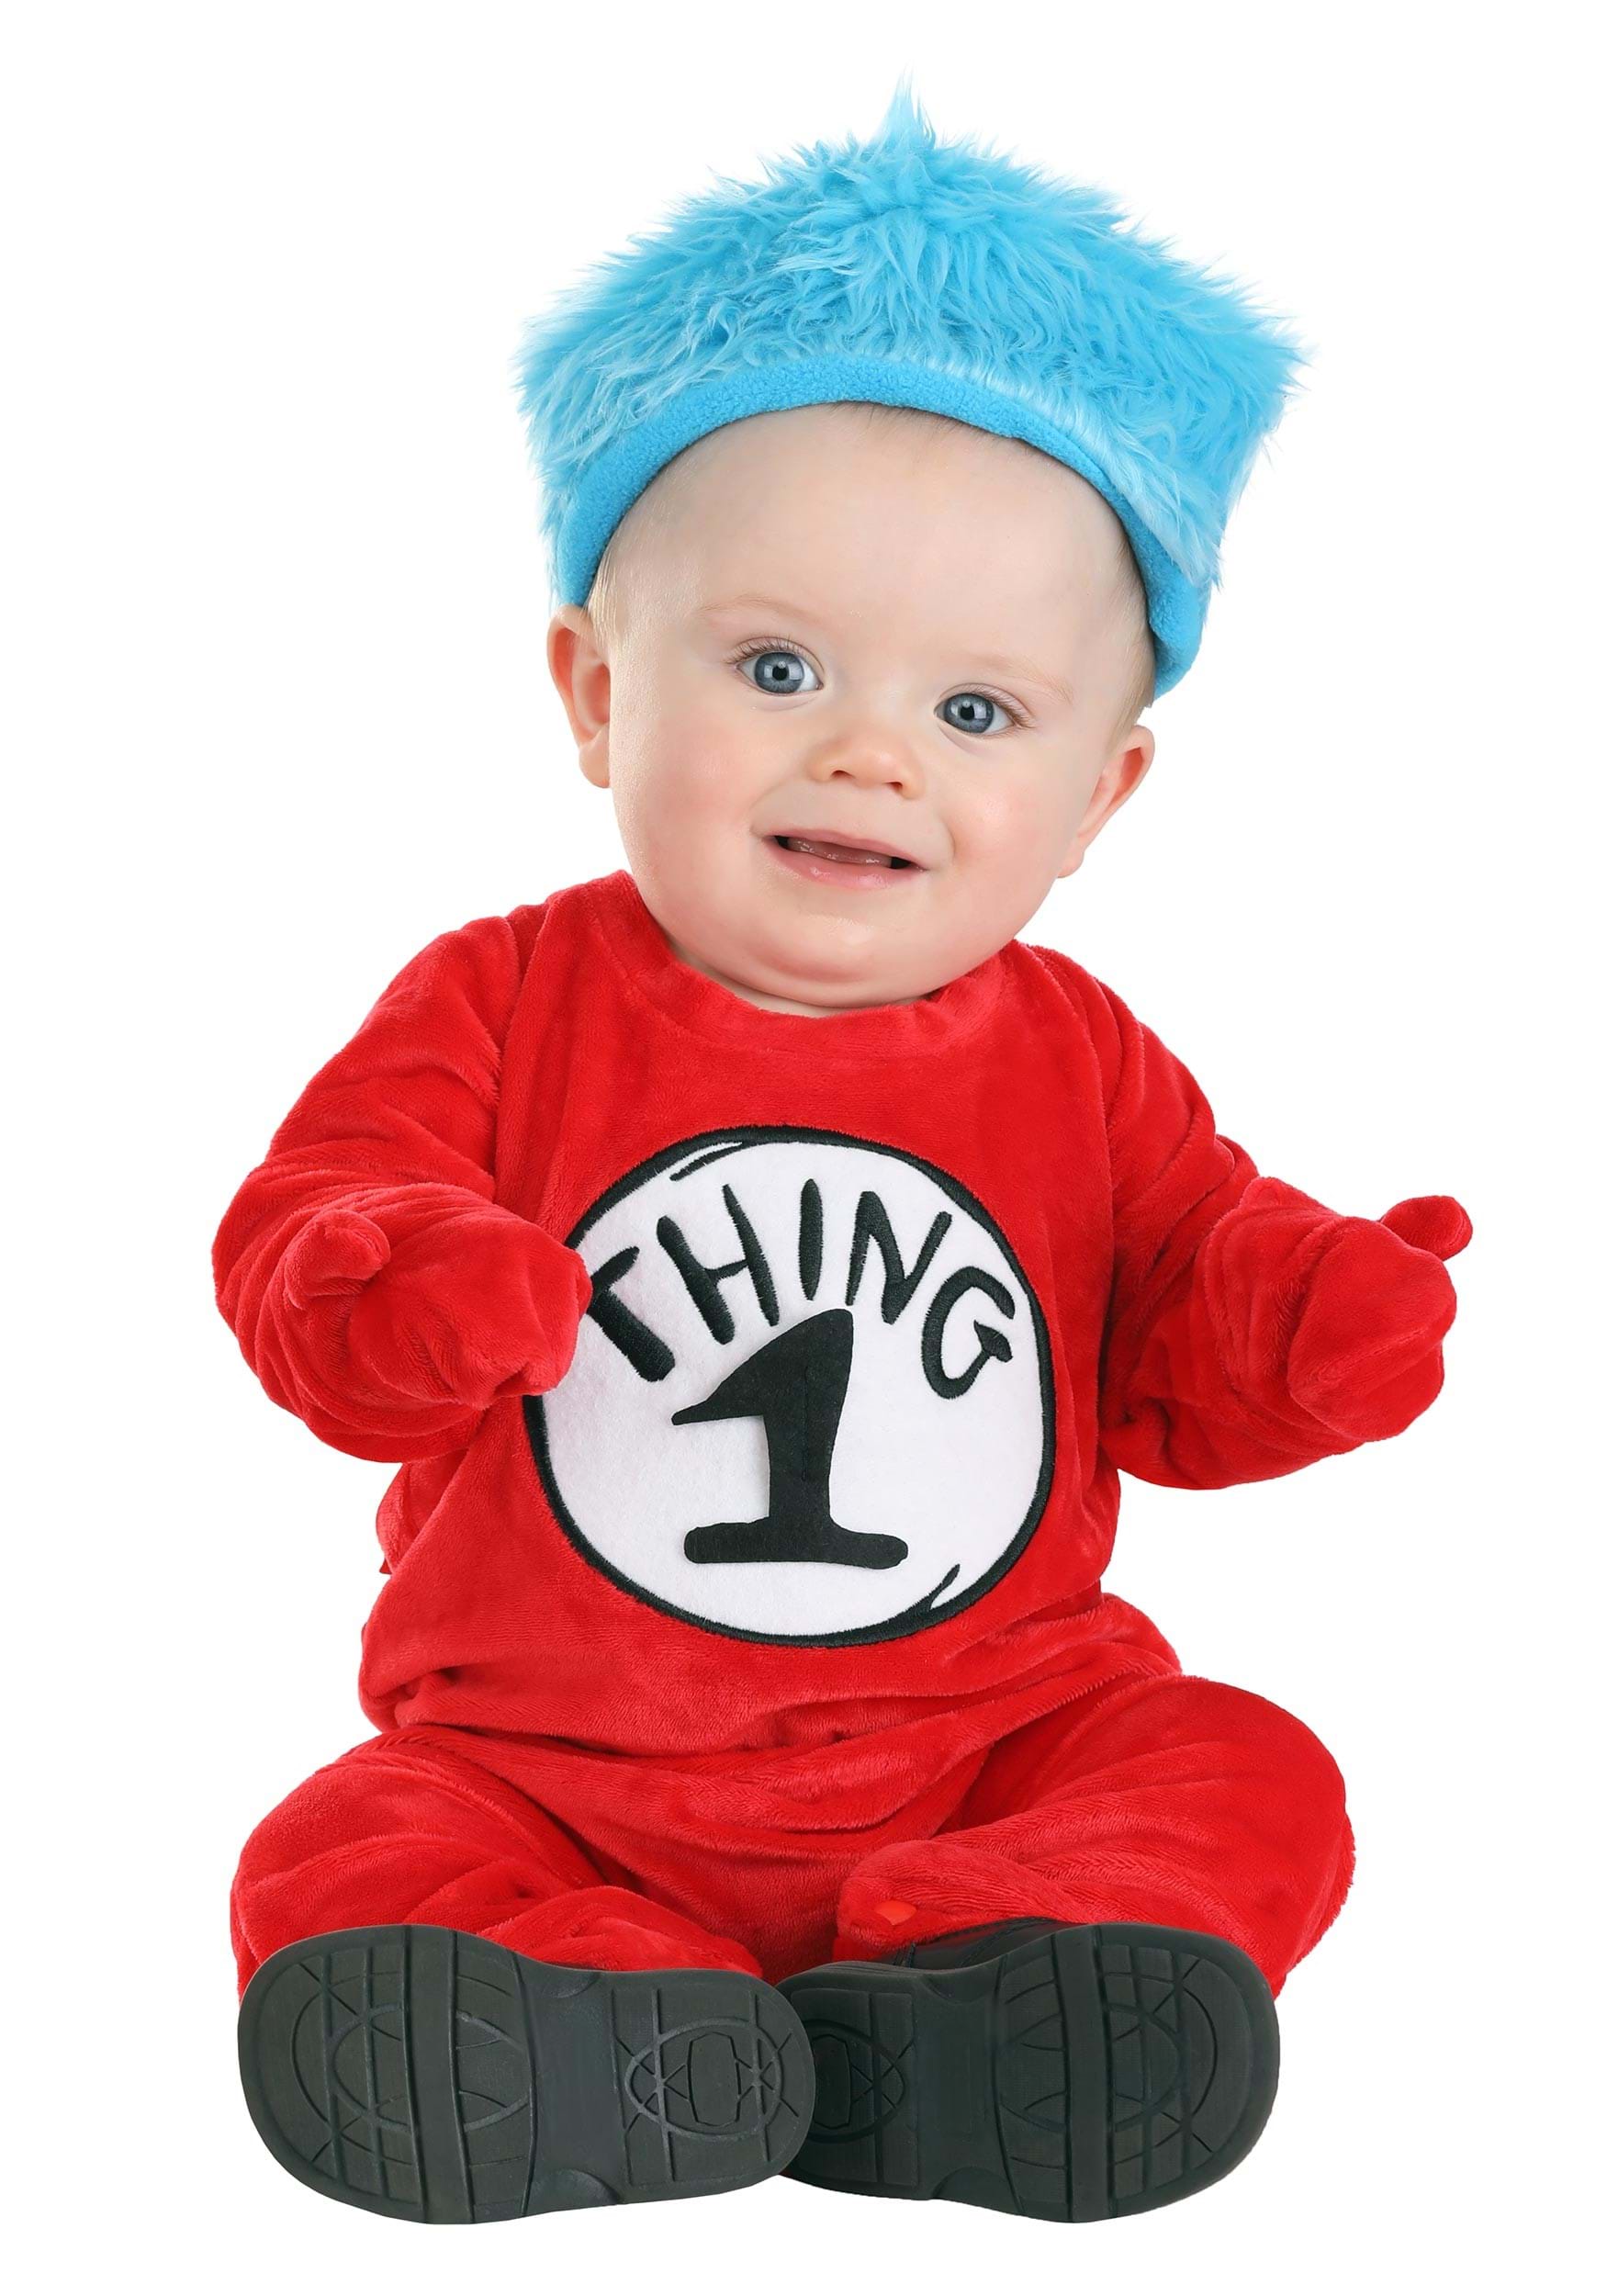 Photos - Fancy Dress A&D FUN Costumes Thing 1 and 2 Infant Costume Red/Blue/White 